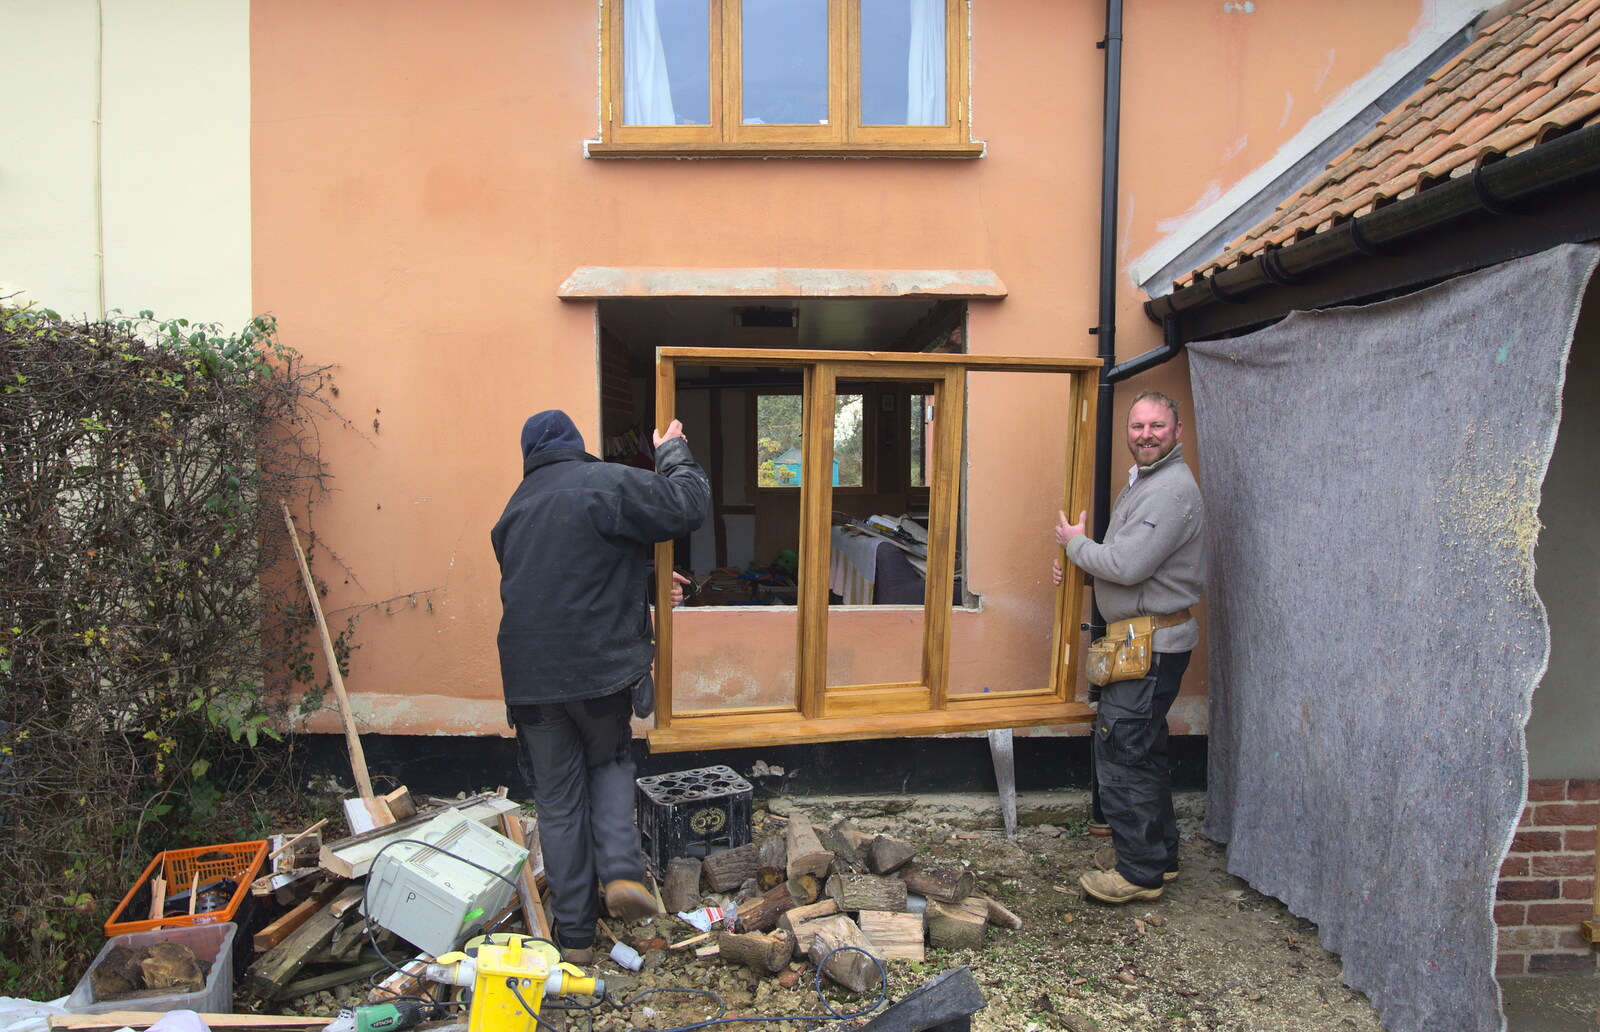 Jack's Birthday and New Windows, Brome and Brockdish, Norfolk - 4th December 2016: The new window frame goes in